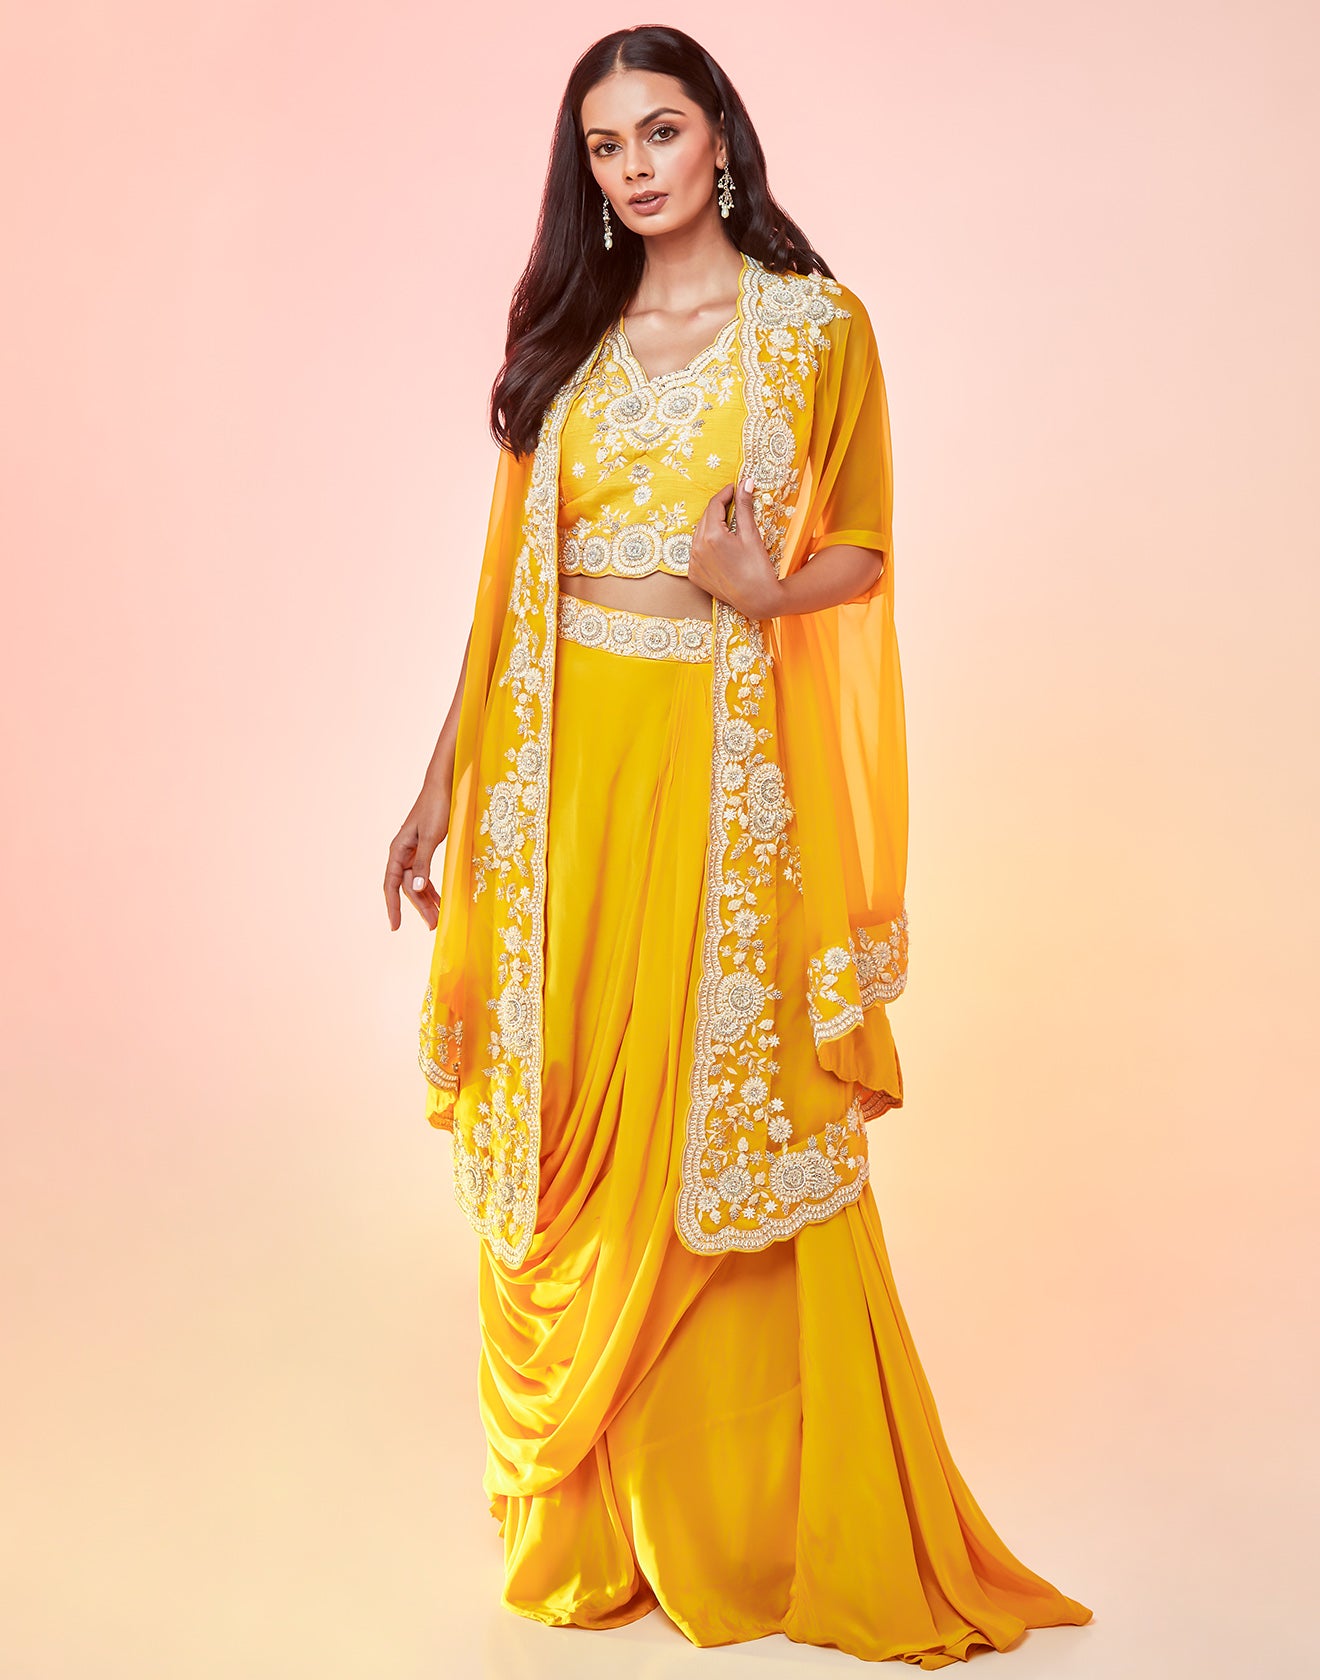 Canary Yellow Draped Fusion Set With Cape Sleeves And Embroidered In Ivory